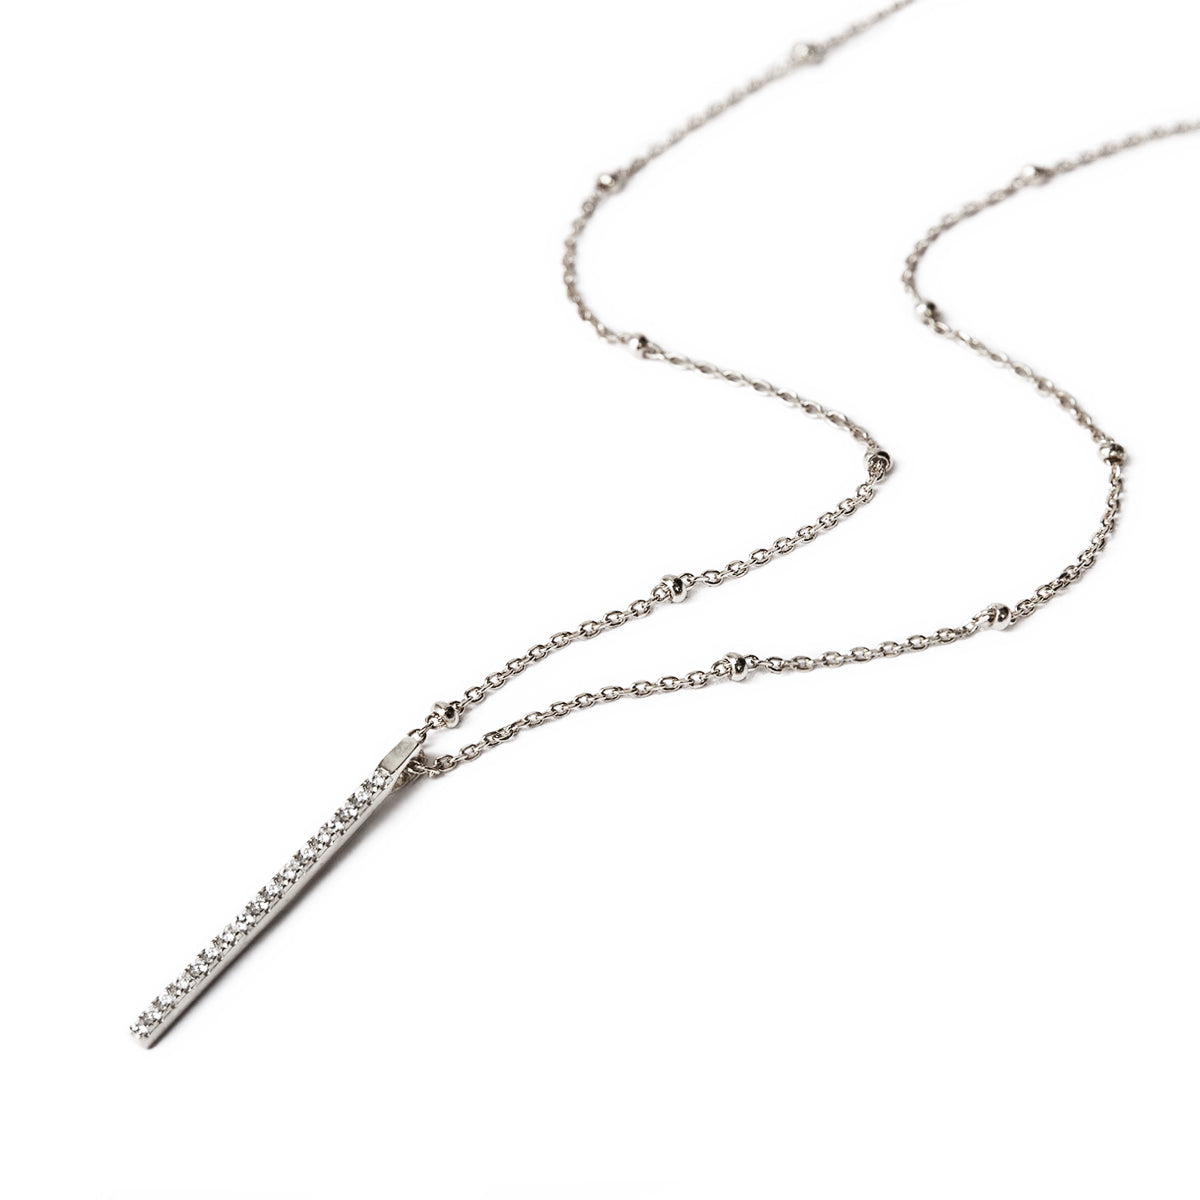 Bar Bead Chain Necklace